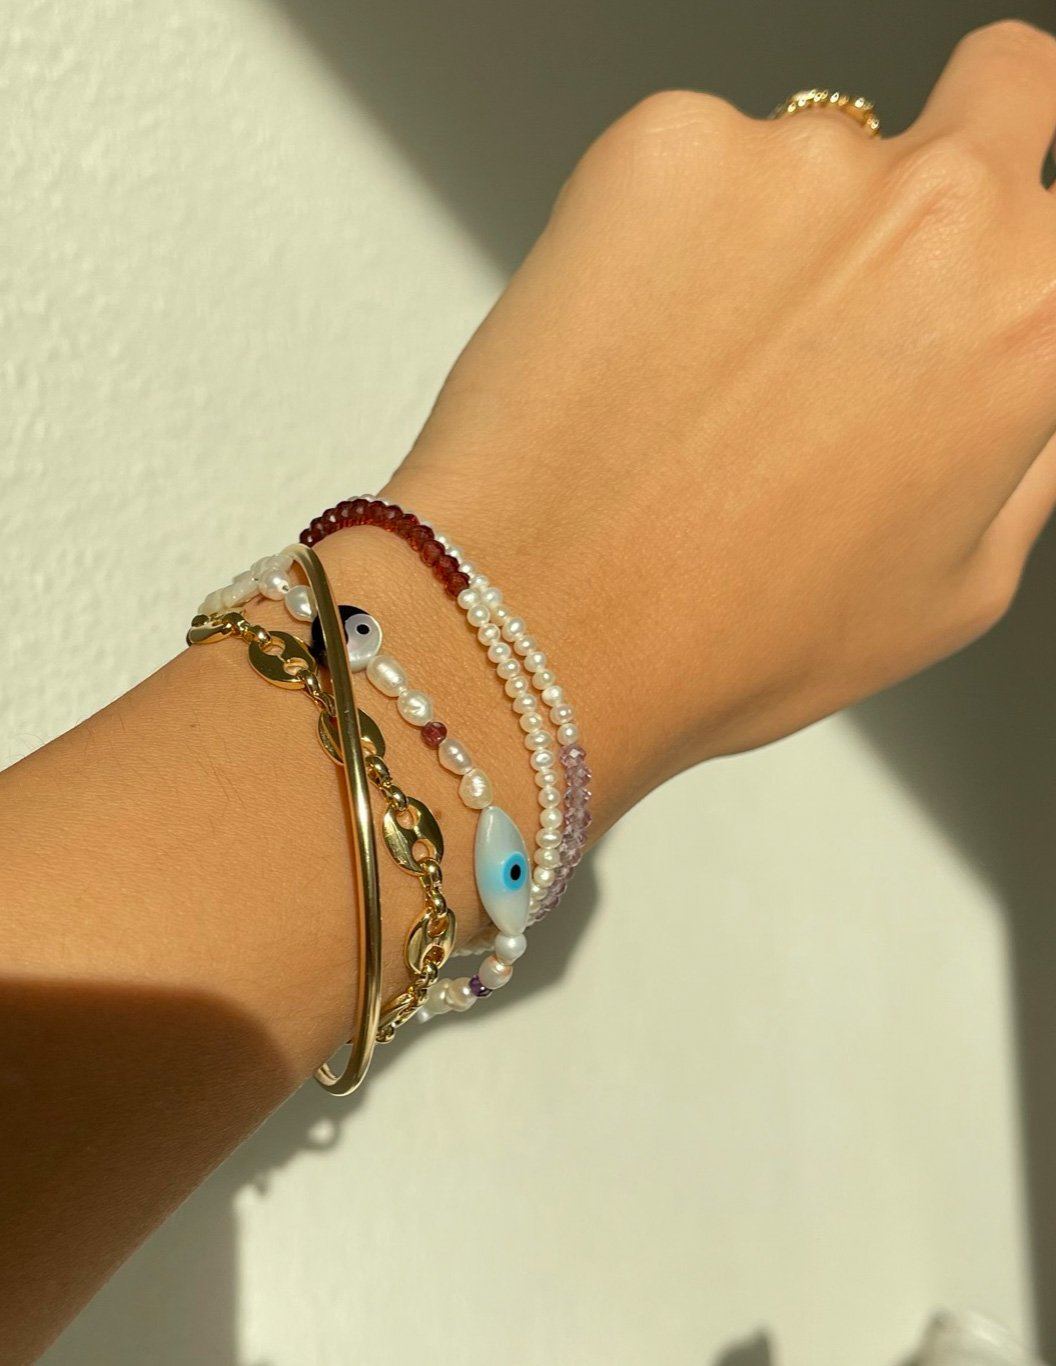 Elo Bracelet by KOZAKH. A 6 to 7 inch adjustable length bracelet, crafted in 14K Gold Filled. Half of the bracelet strand features 3.5mm Freshwater Pearls and 3.5mm Faceted gemstone beads on the other half.